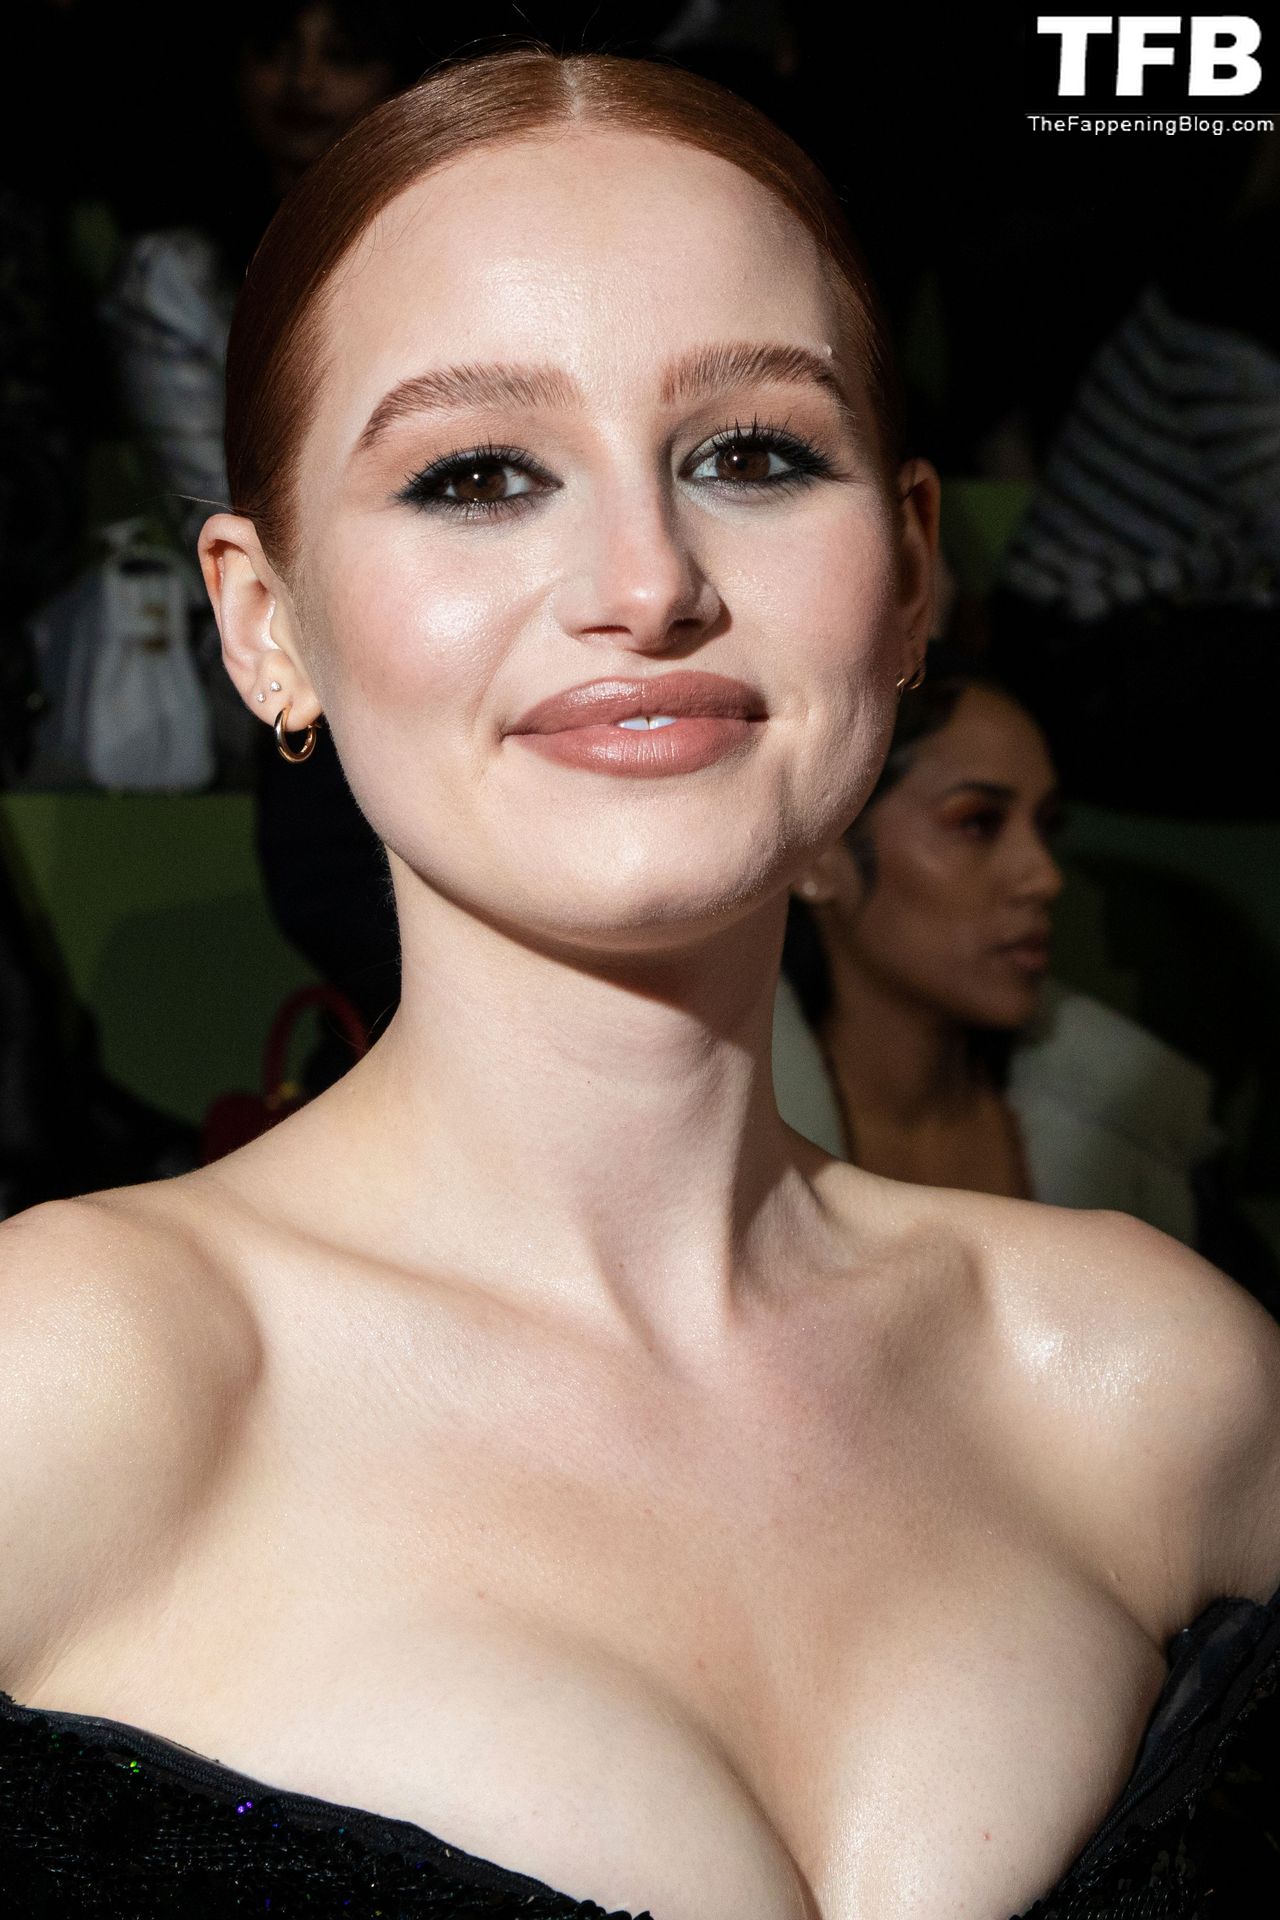 Madelaine-Petsch-Sexy-The-Fappening-Blog-37.jpg